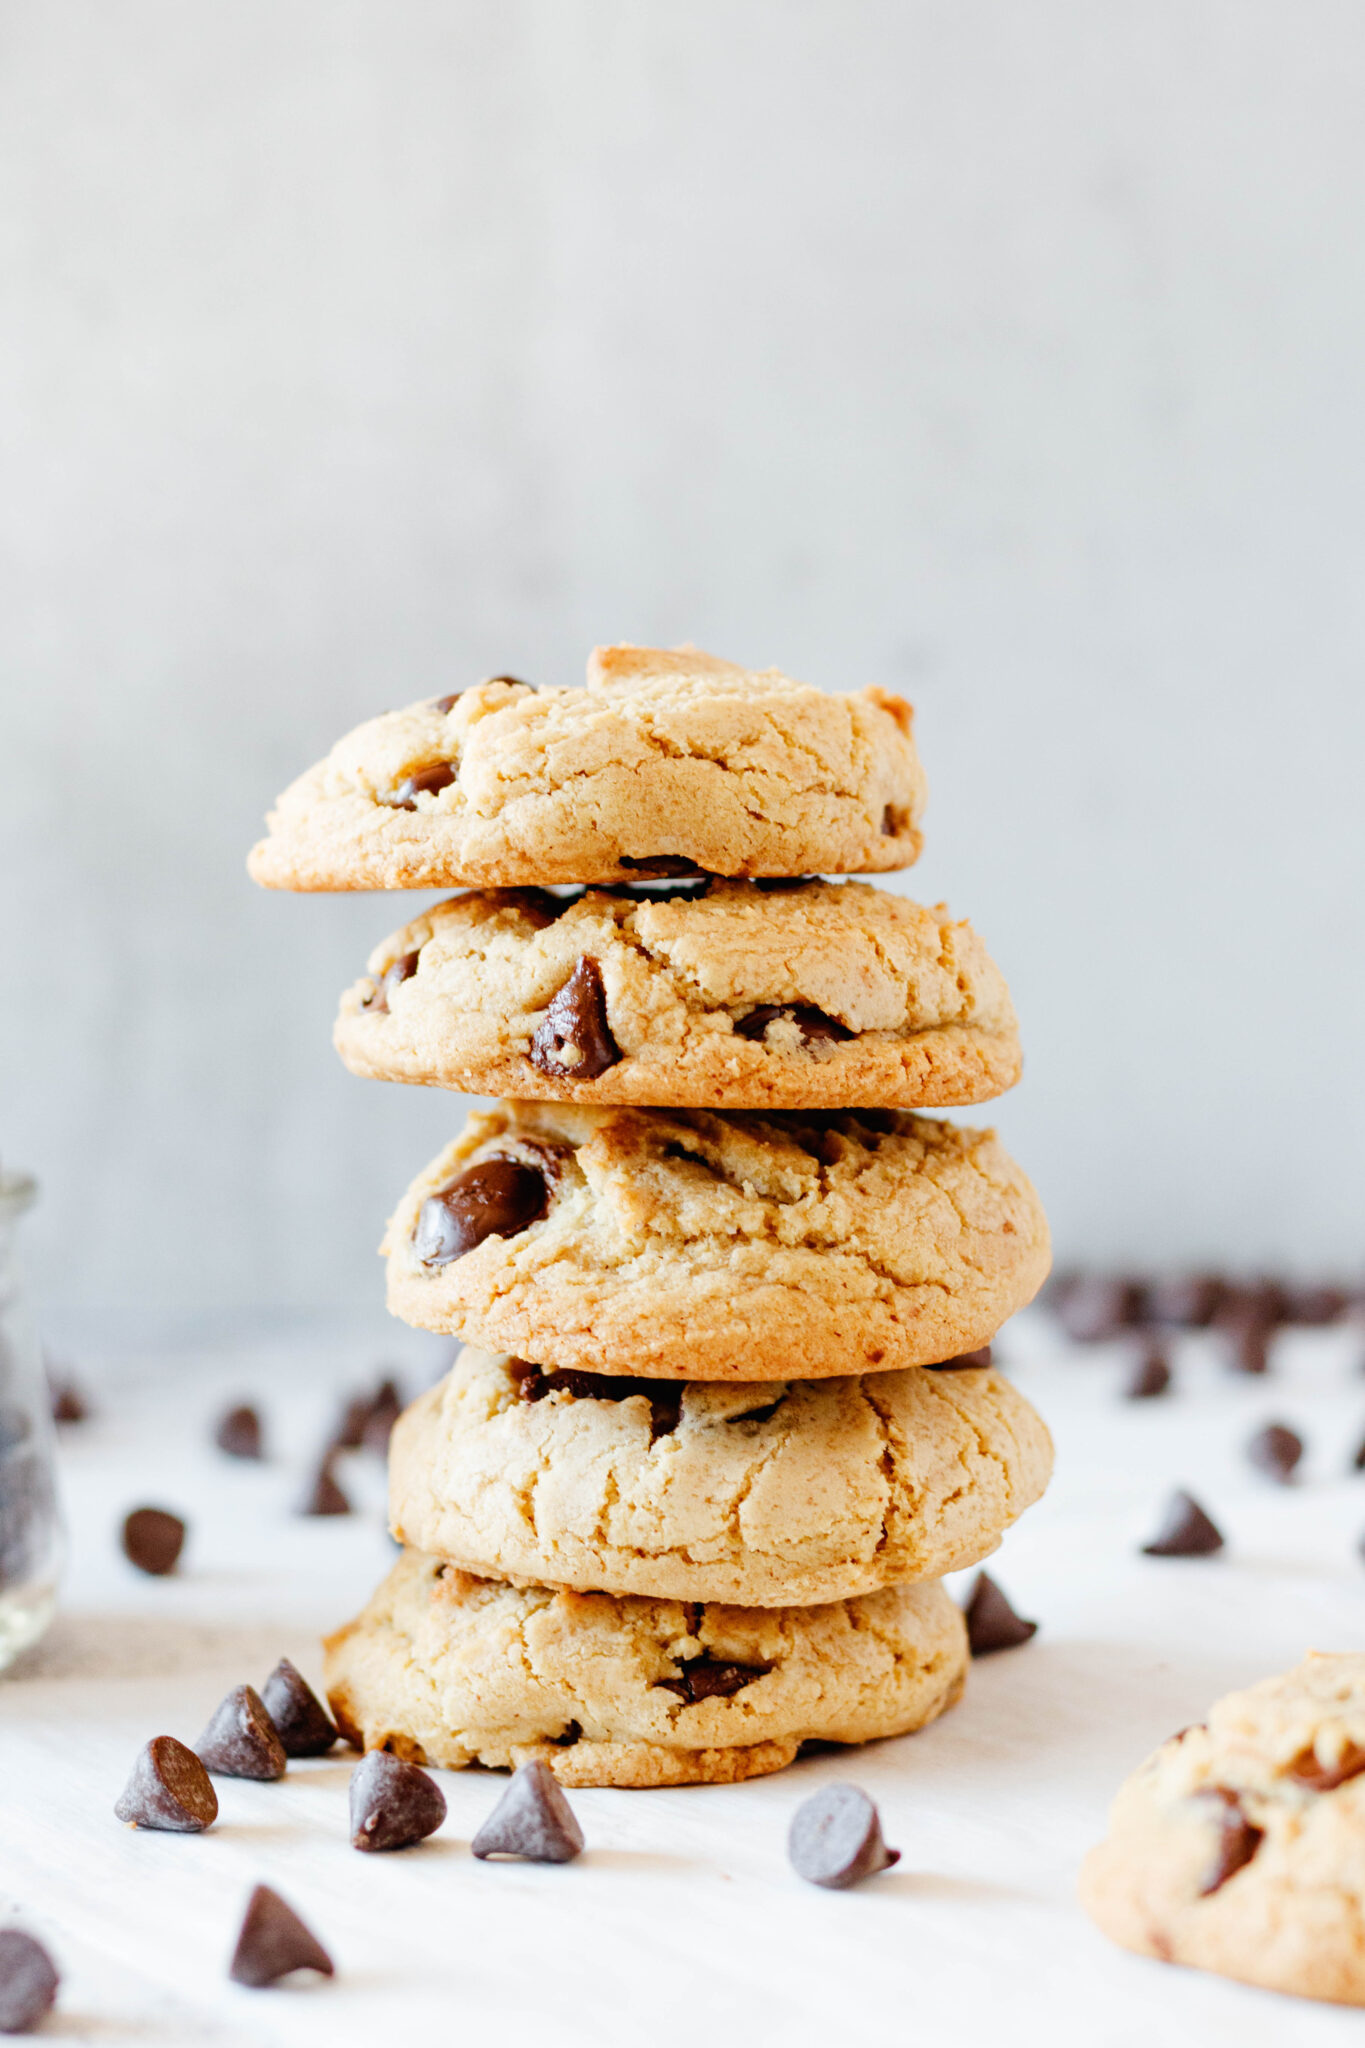 Classic Chocolate Chip Cookies - Goodie Godmother